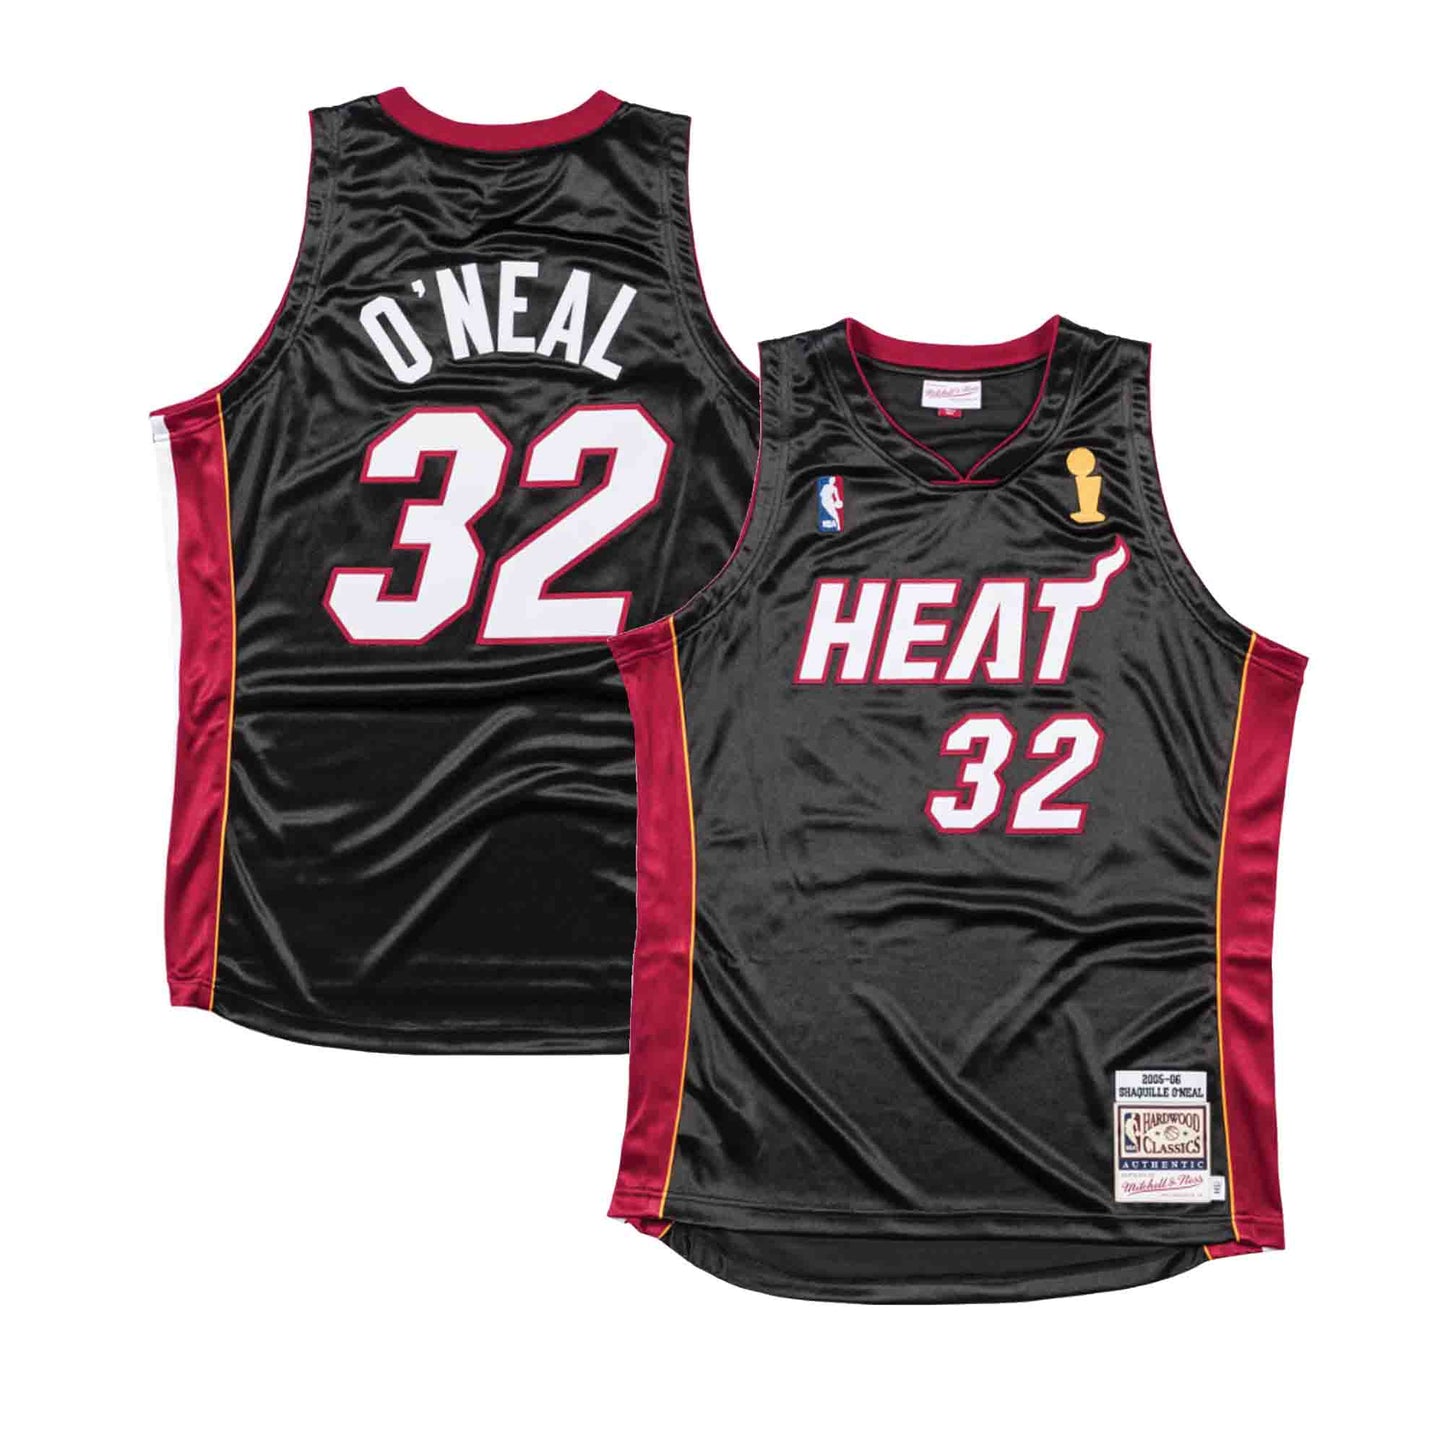 NBA Authentic Jersey Miami Heat Road Finals 2005-06 Shaquille O